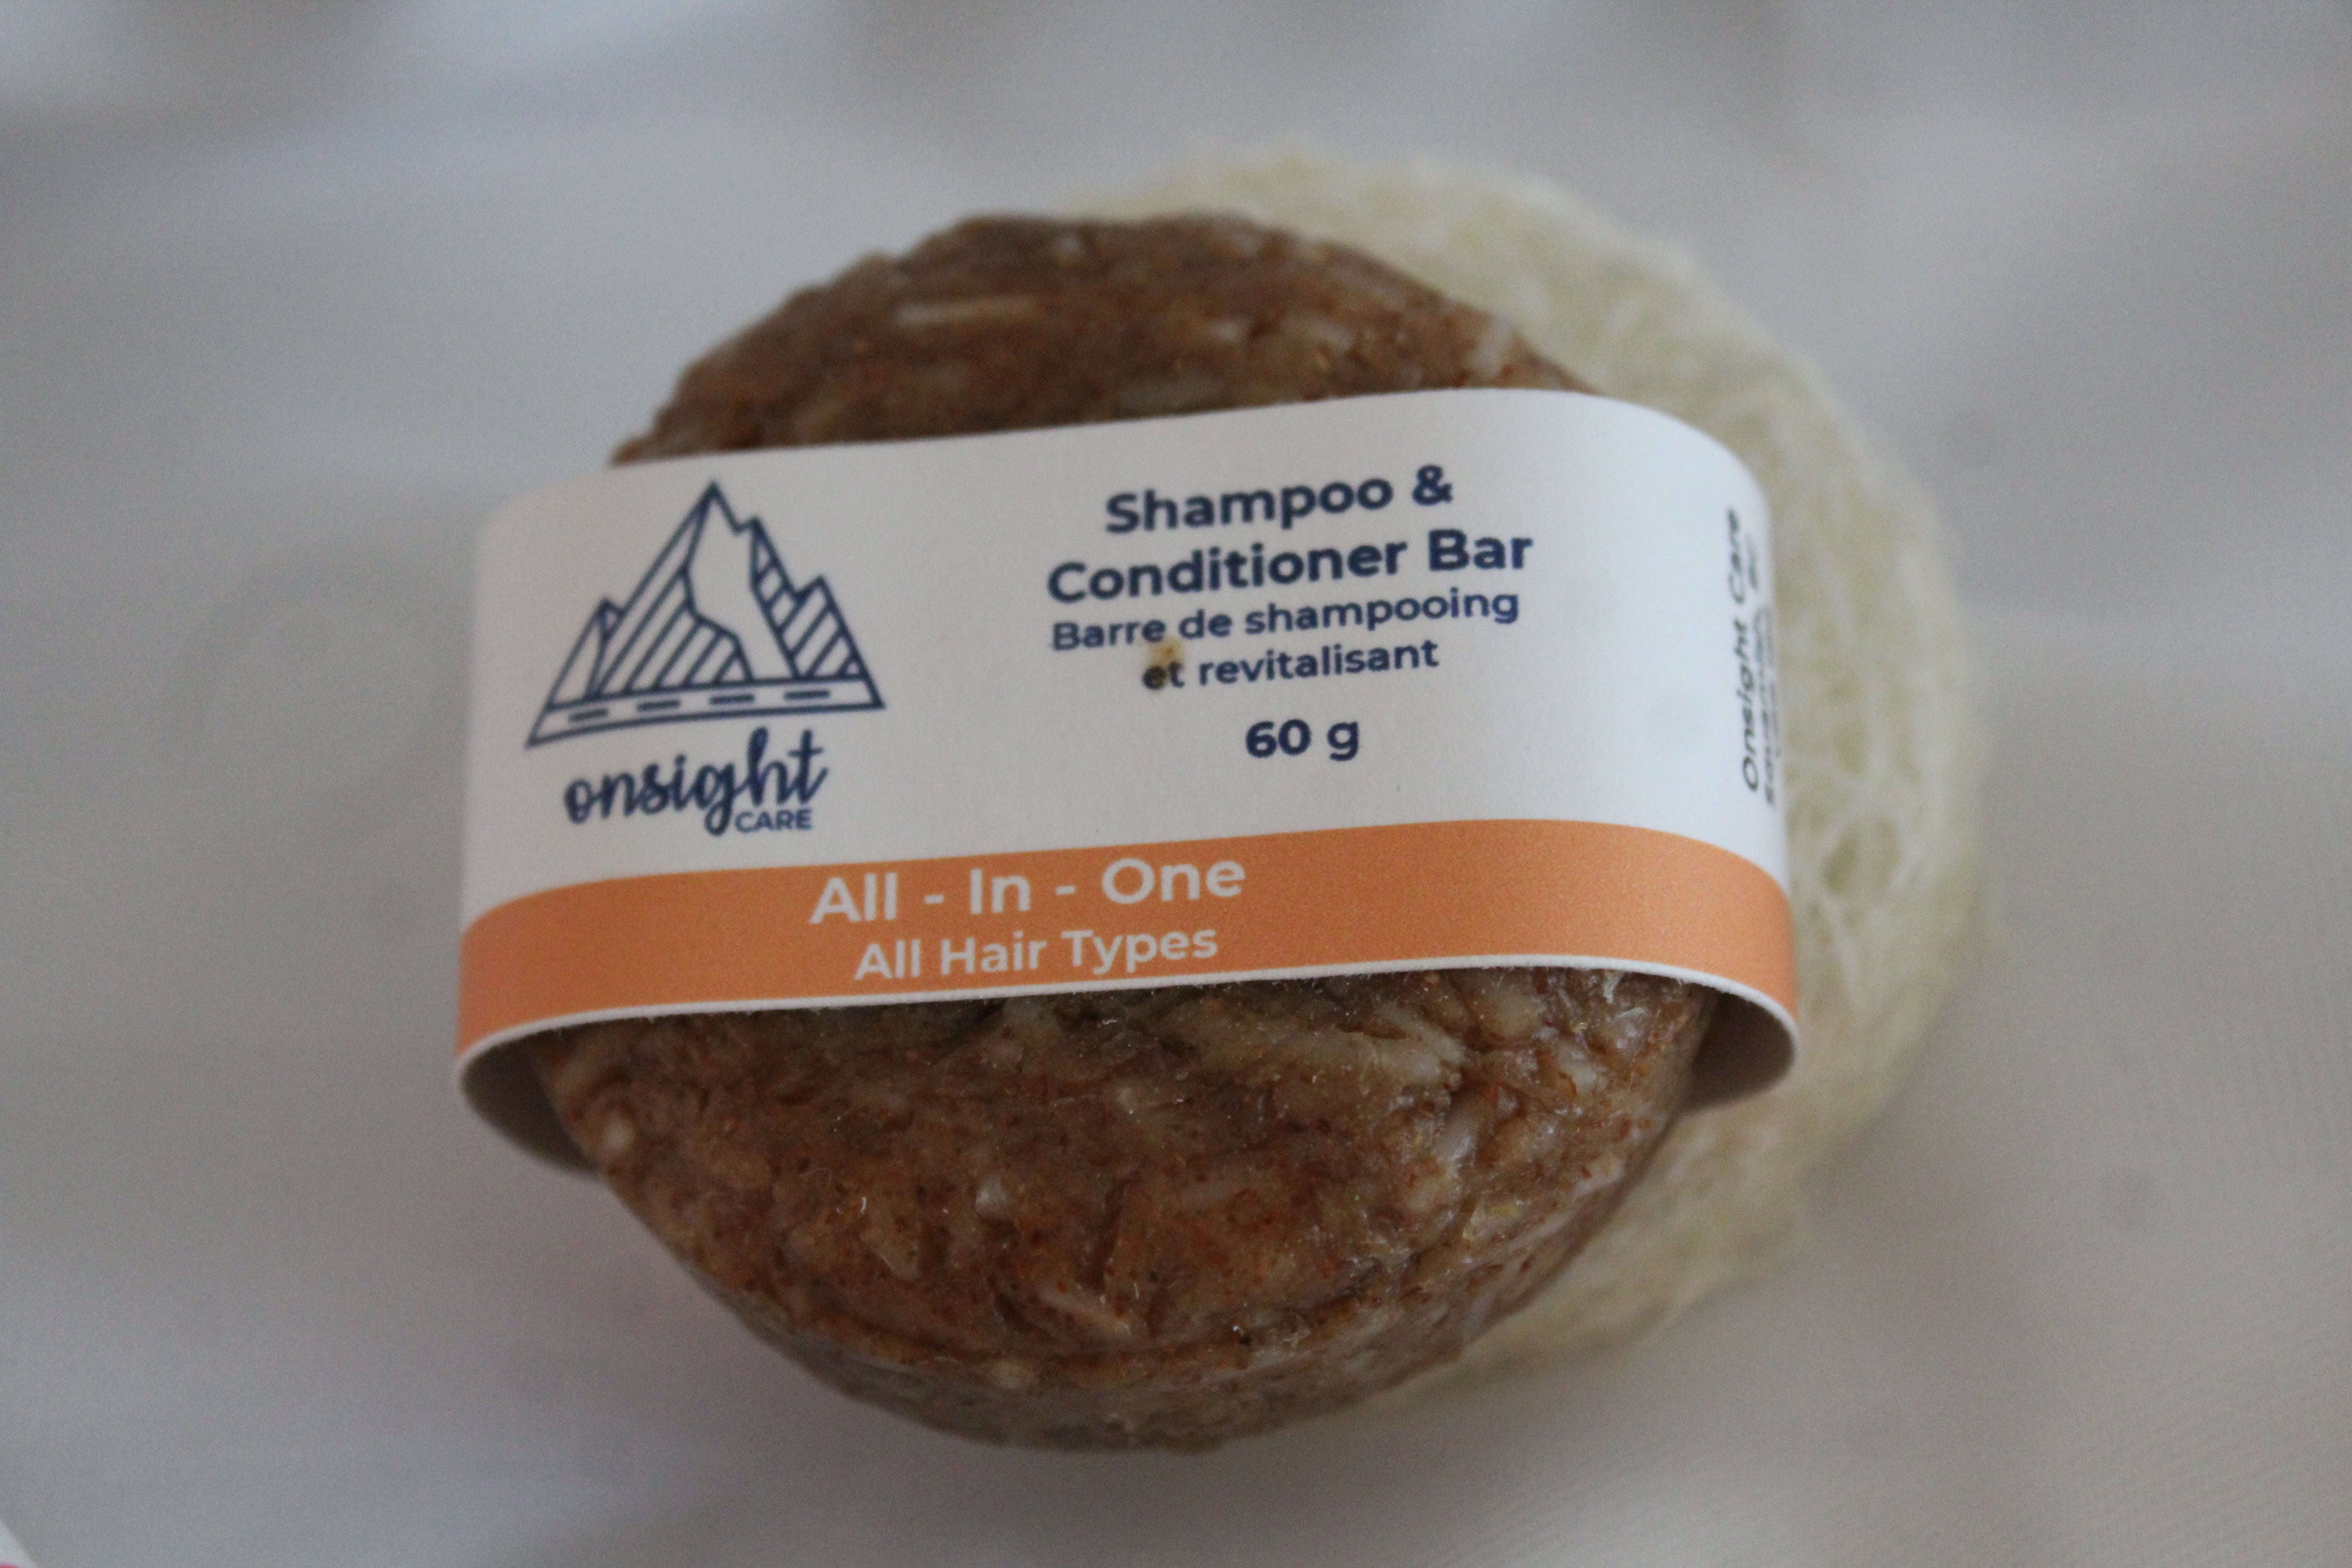 All In One Shampoo & Conditioner Bar